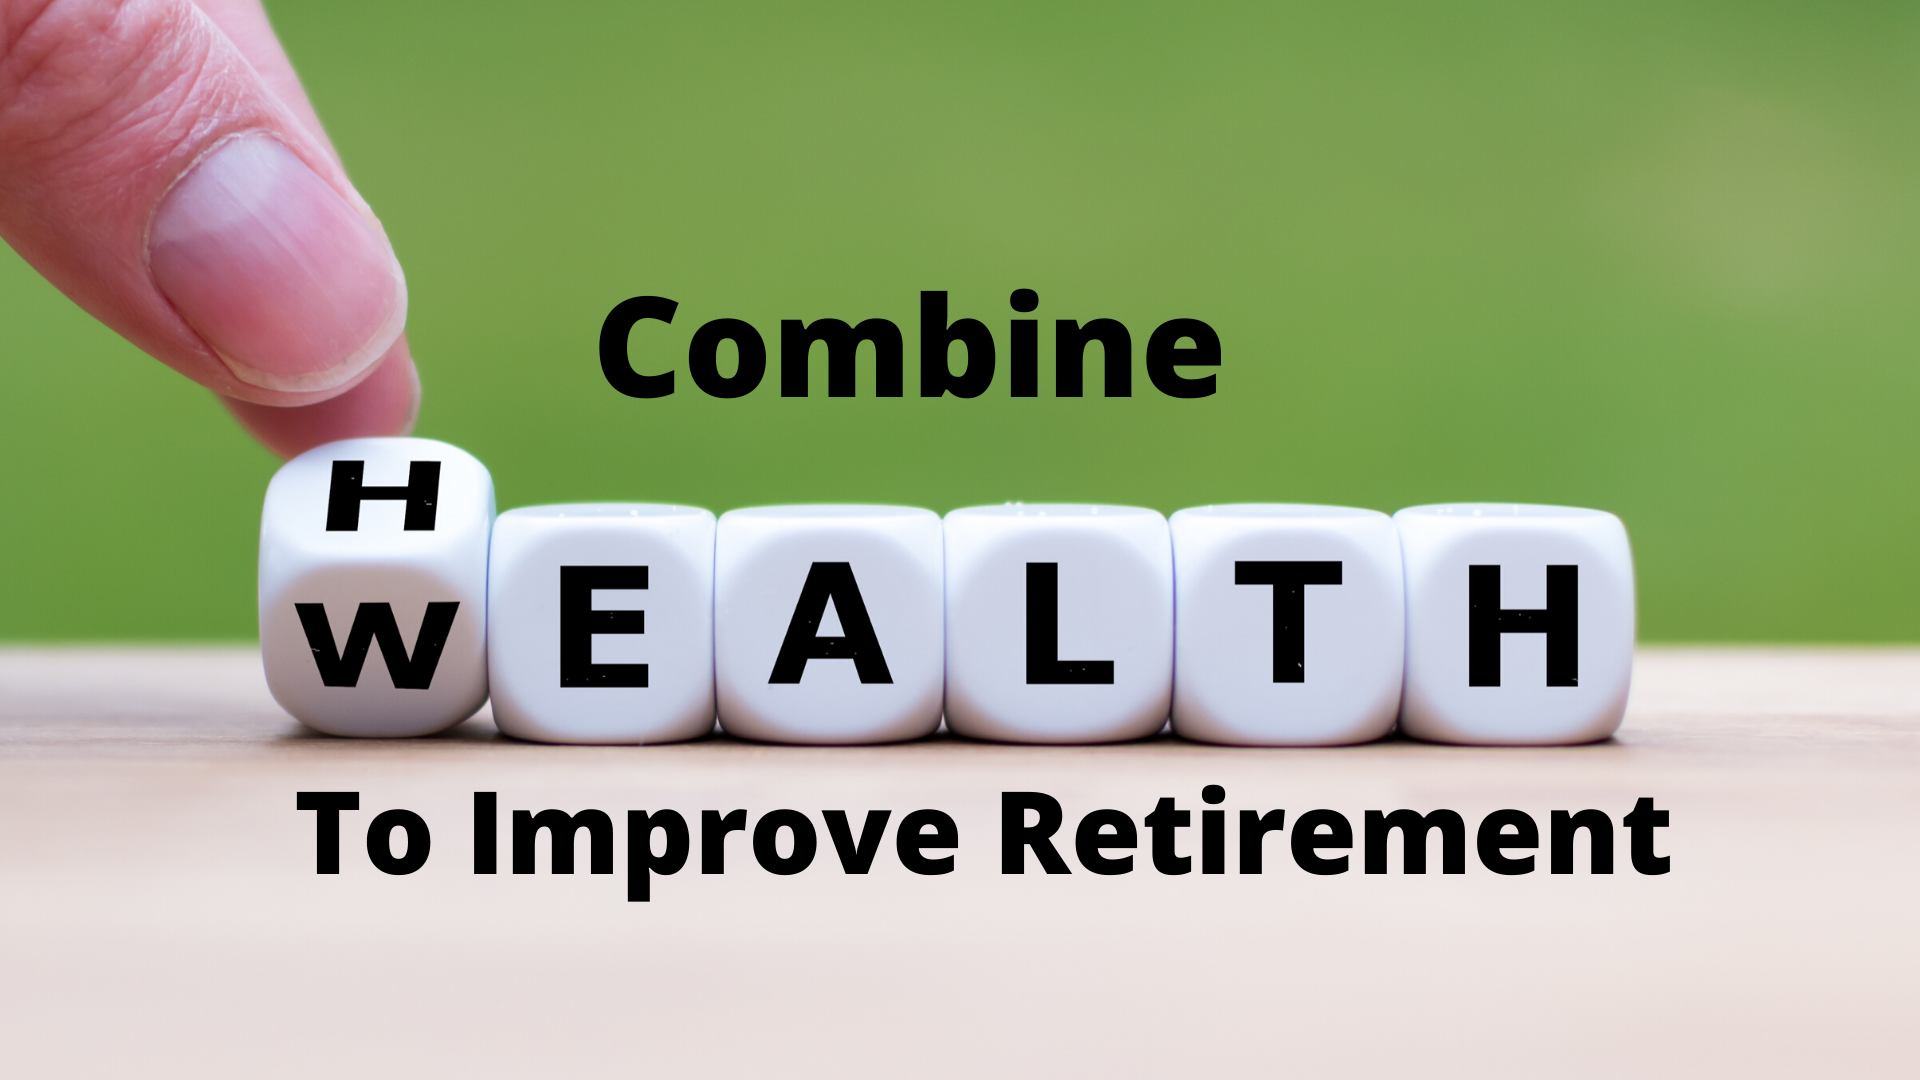 Focus on Good Habits for Your Health and Finances for a Fulfilling Retirement